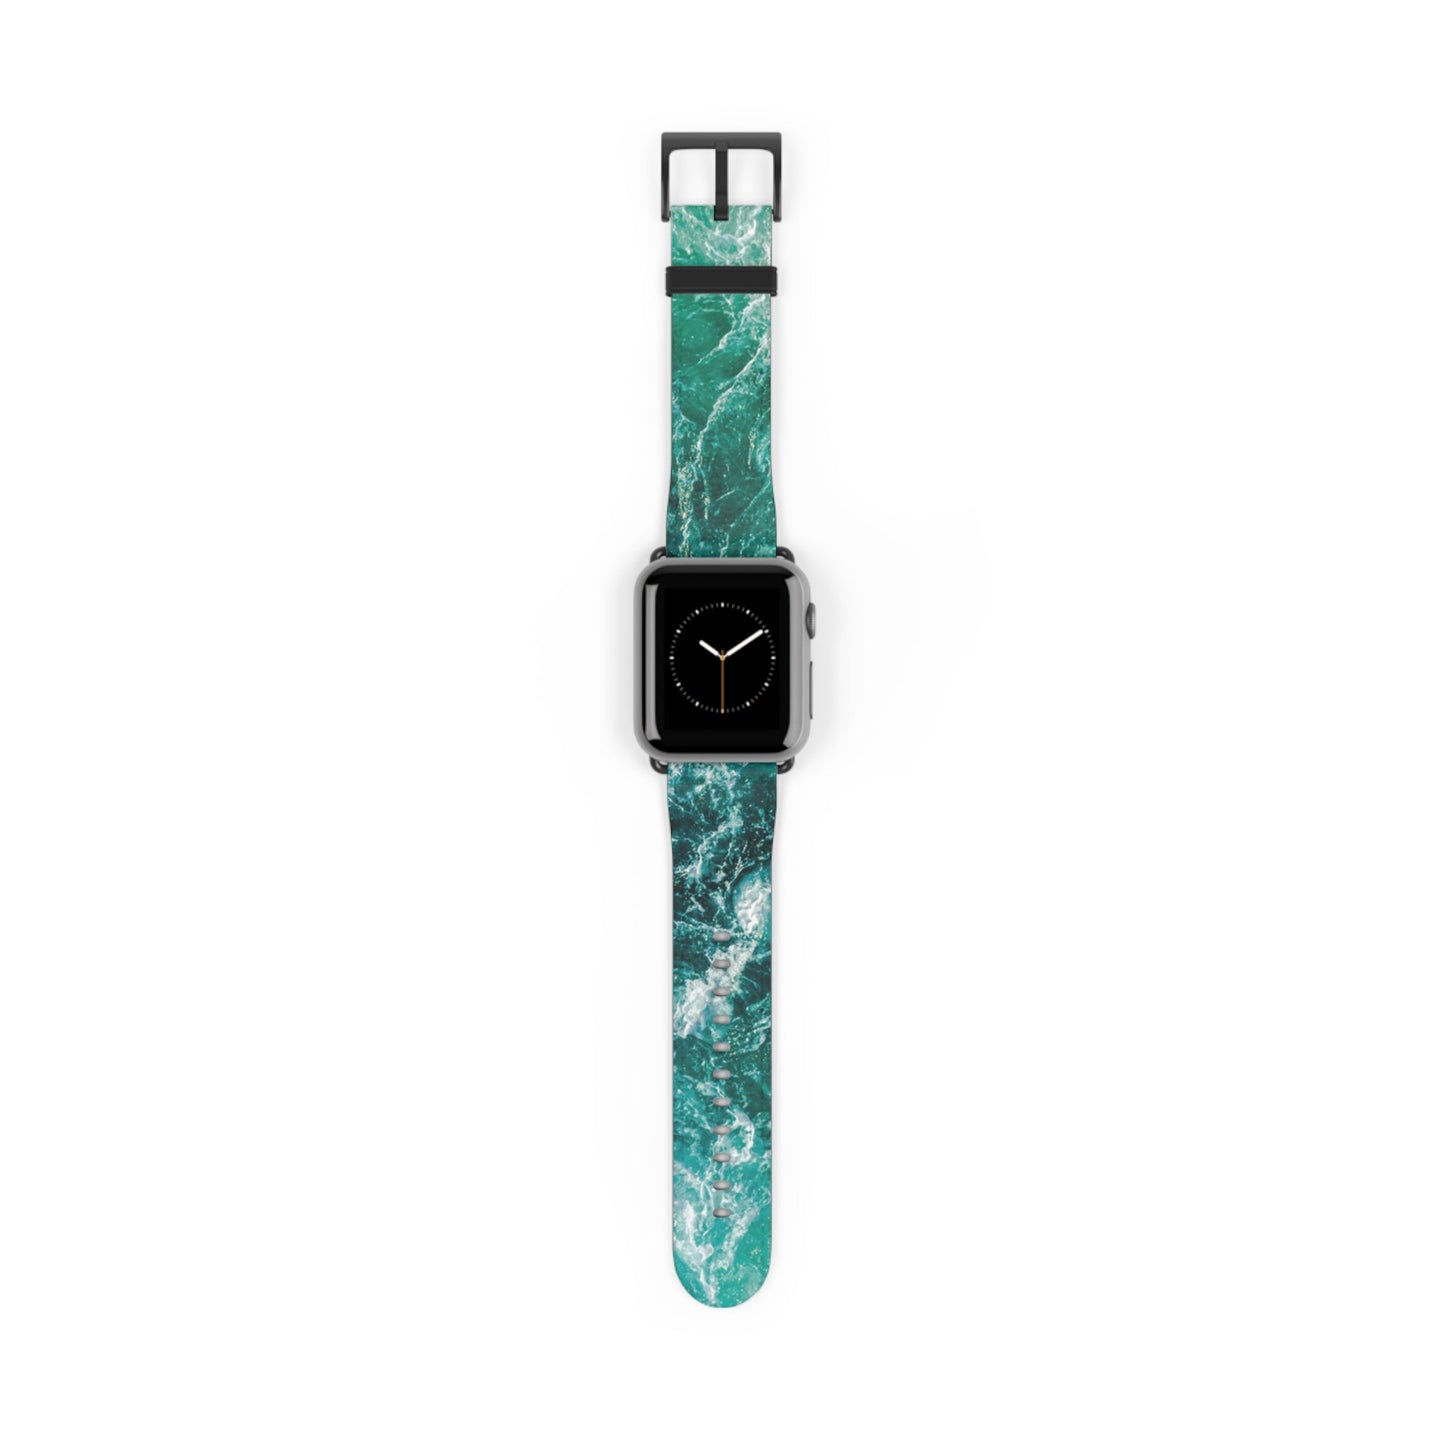 Accessories - Water Stream Gushy River Watch Band